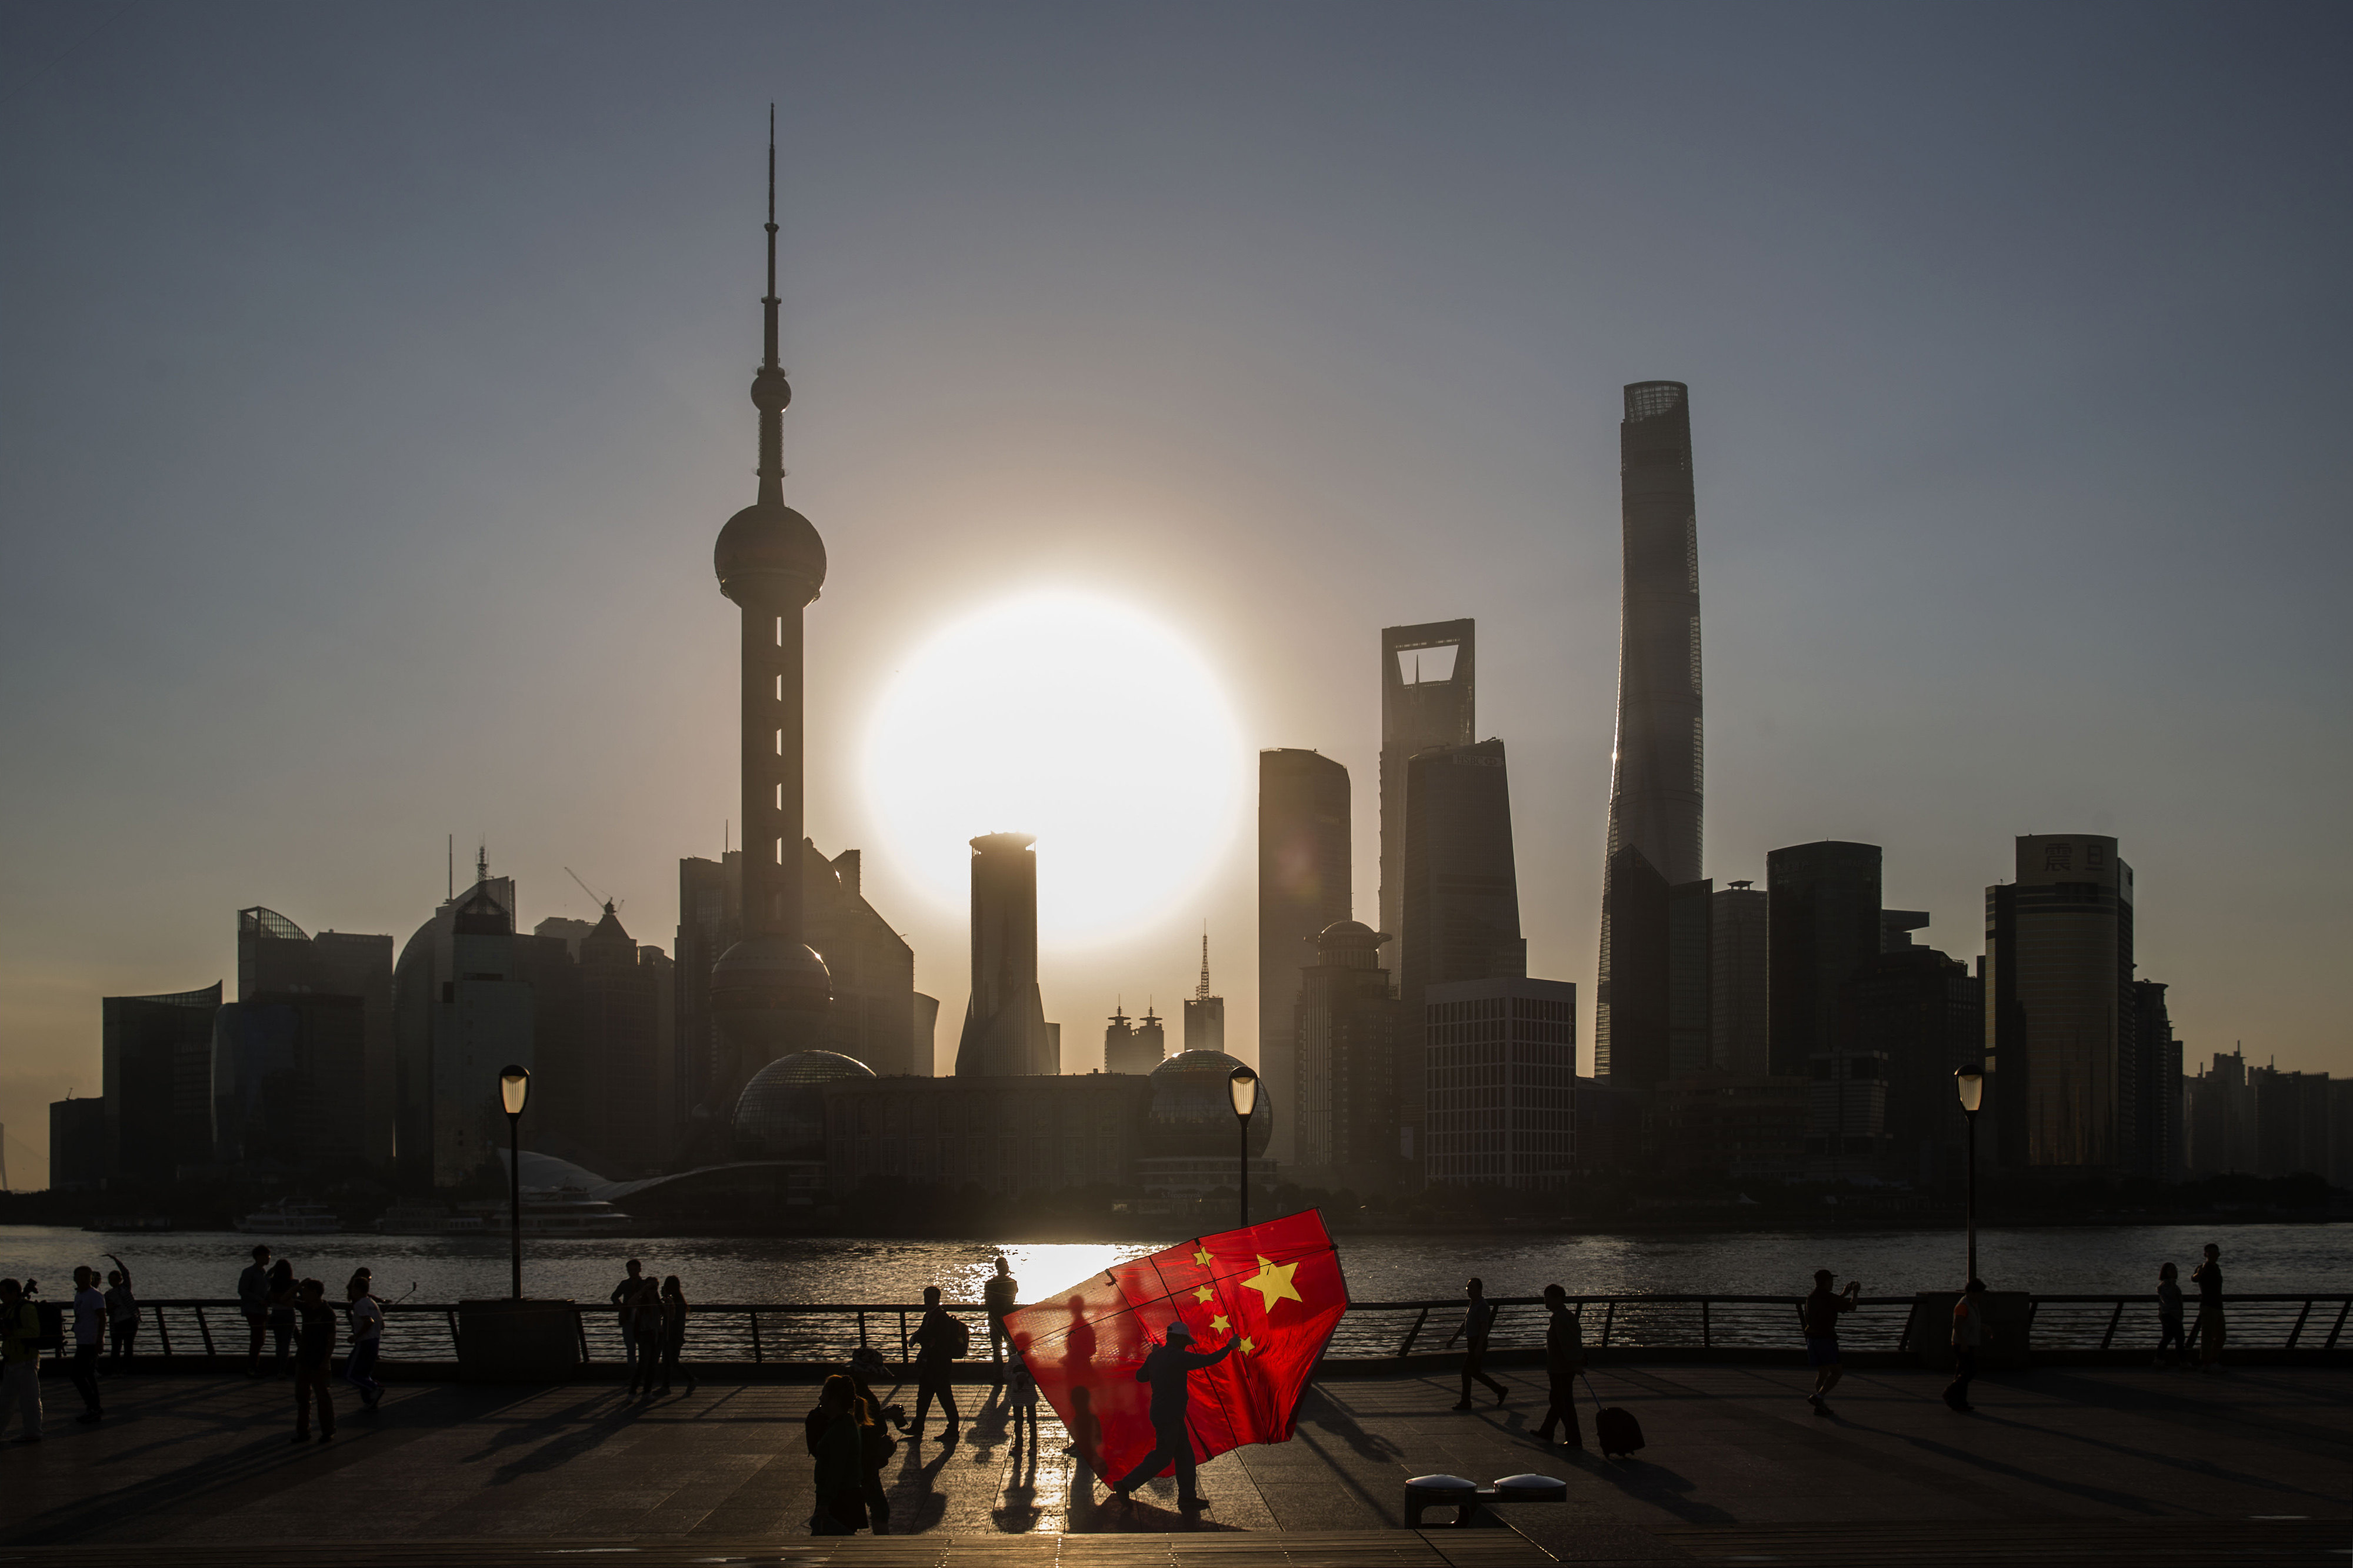 A man carries a kite in the shape of the Chinese national flag in Shanghai. None of the Chinese banks that are part of the MSCI ACWI global equity index have carried out analysis of climate scenarios, to estimate the financial impact of various degrees of global warming. Photo: Bloomberg